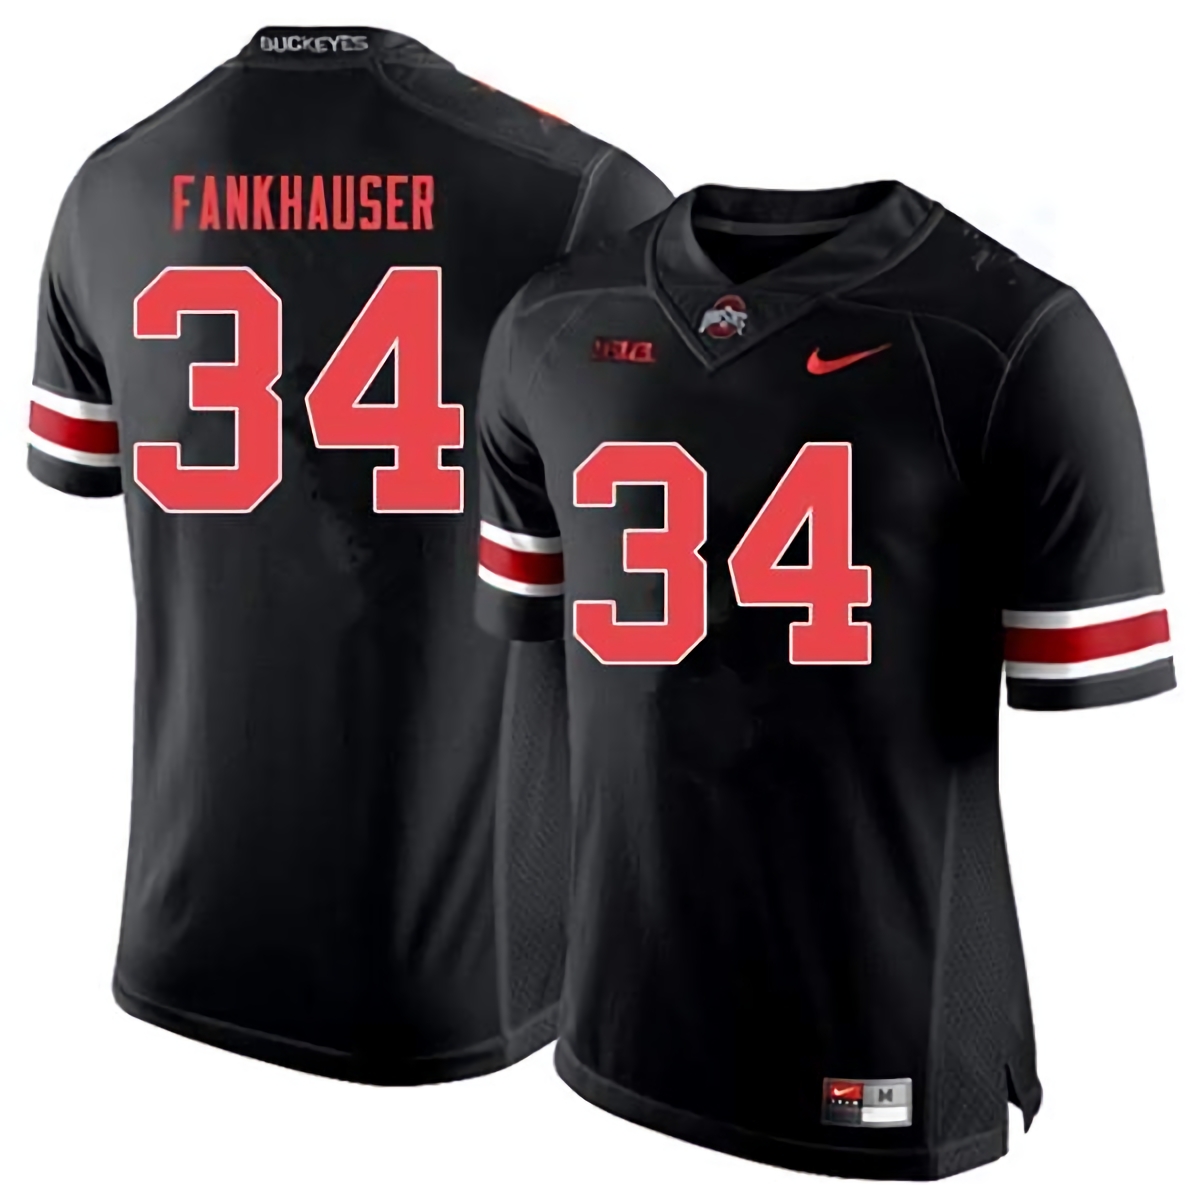 Owen Fankhauser Ohio State Buckeyes Men's NCAA #34 Nike Black Out College Stitched Football Jersey HQQ5256KQ